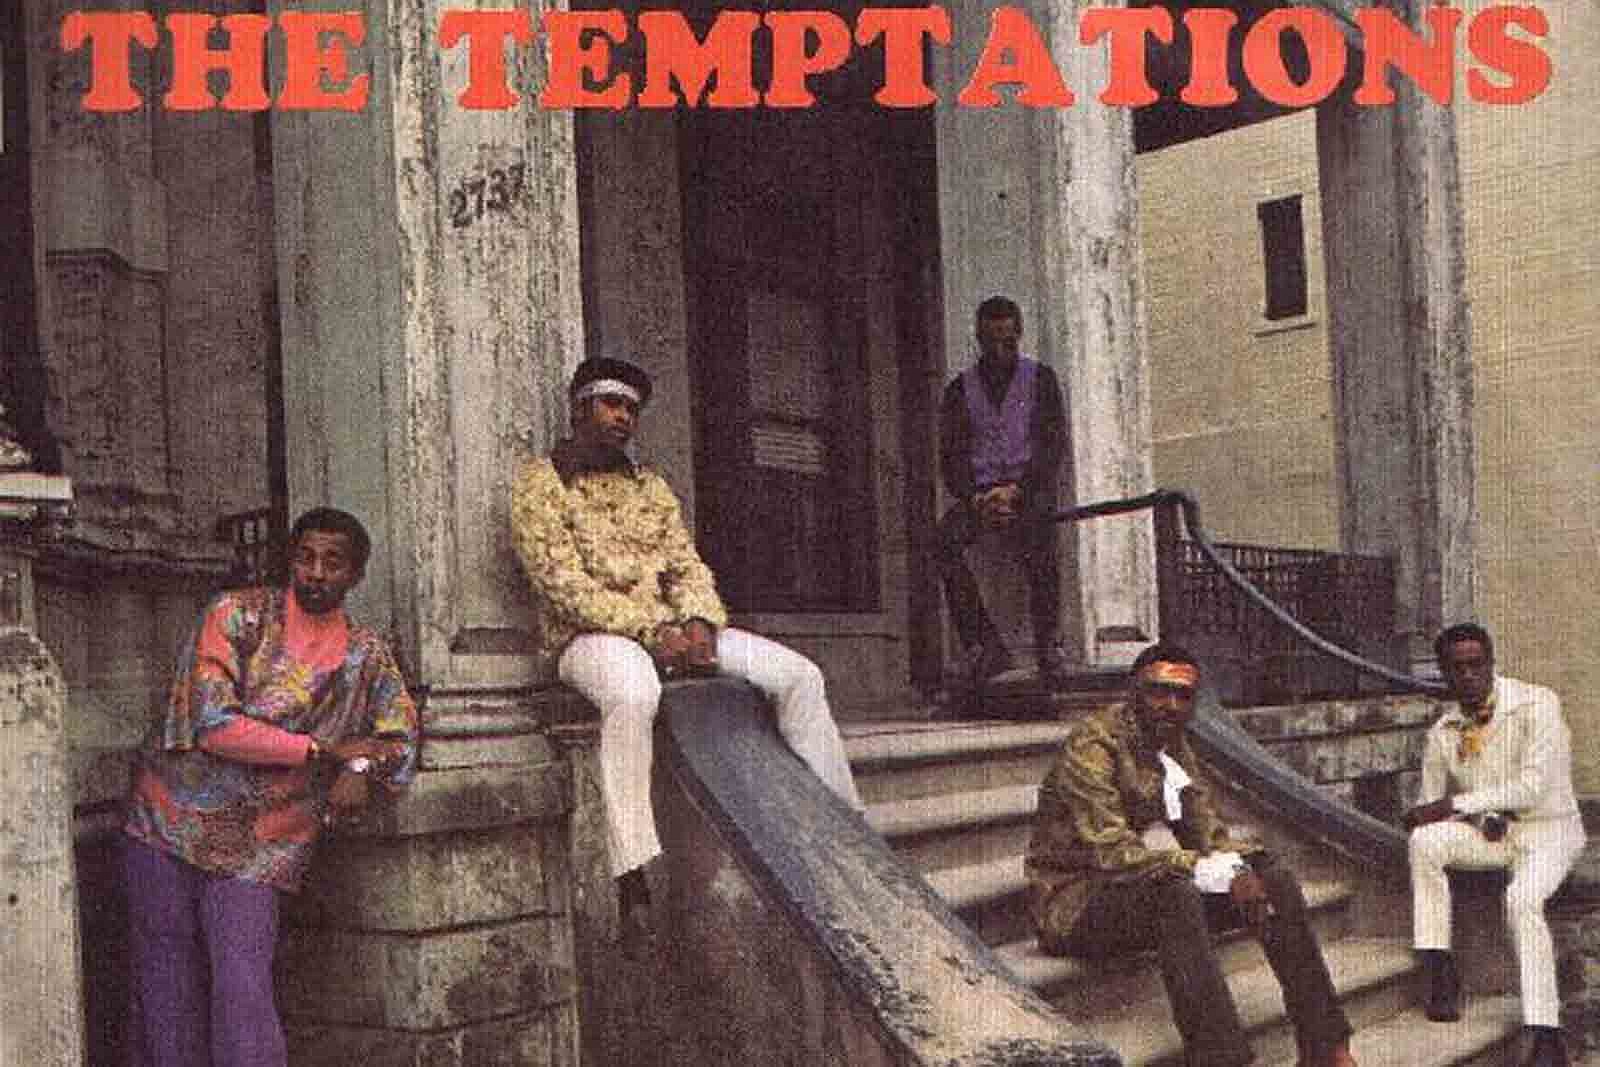 When Temptations Hit No. 1 With Old-School 'Just My Imagination'